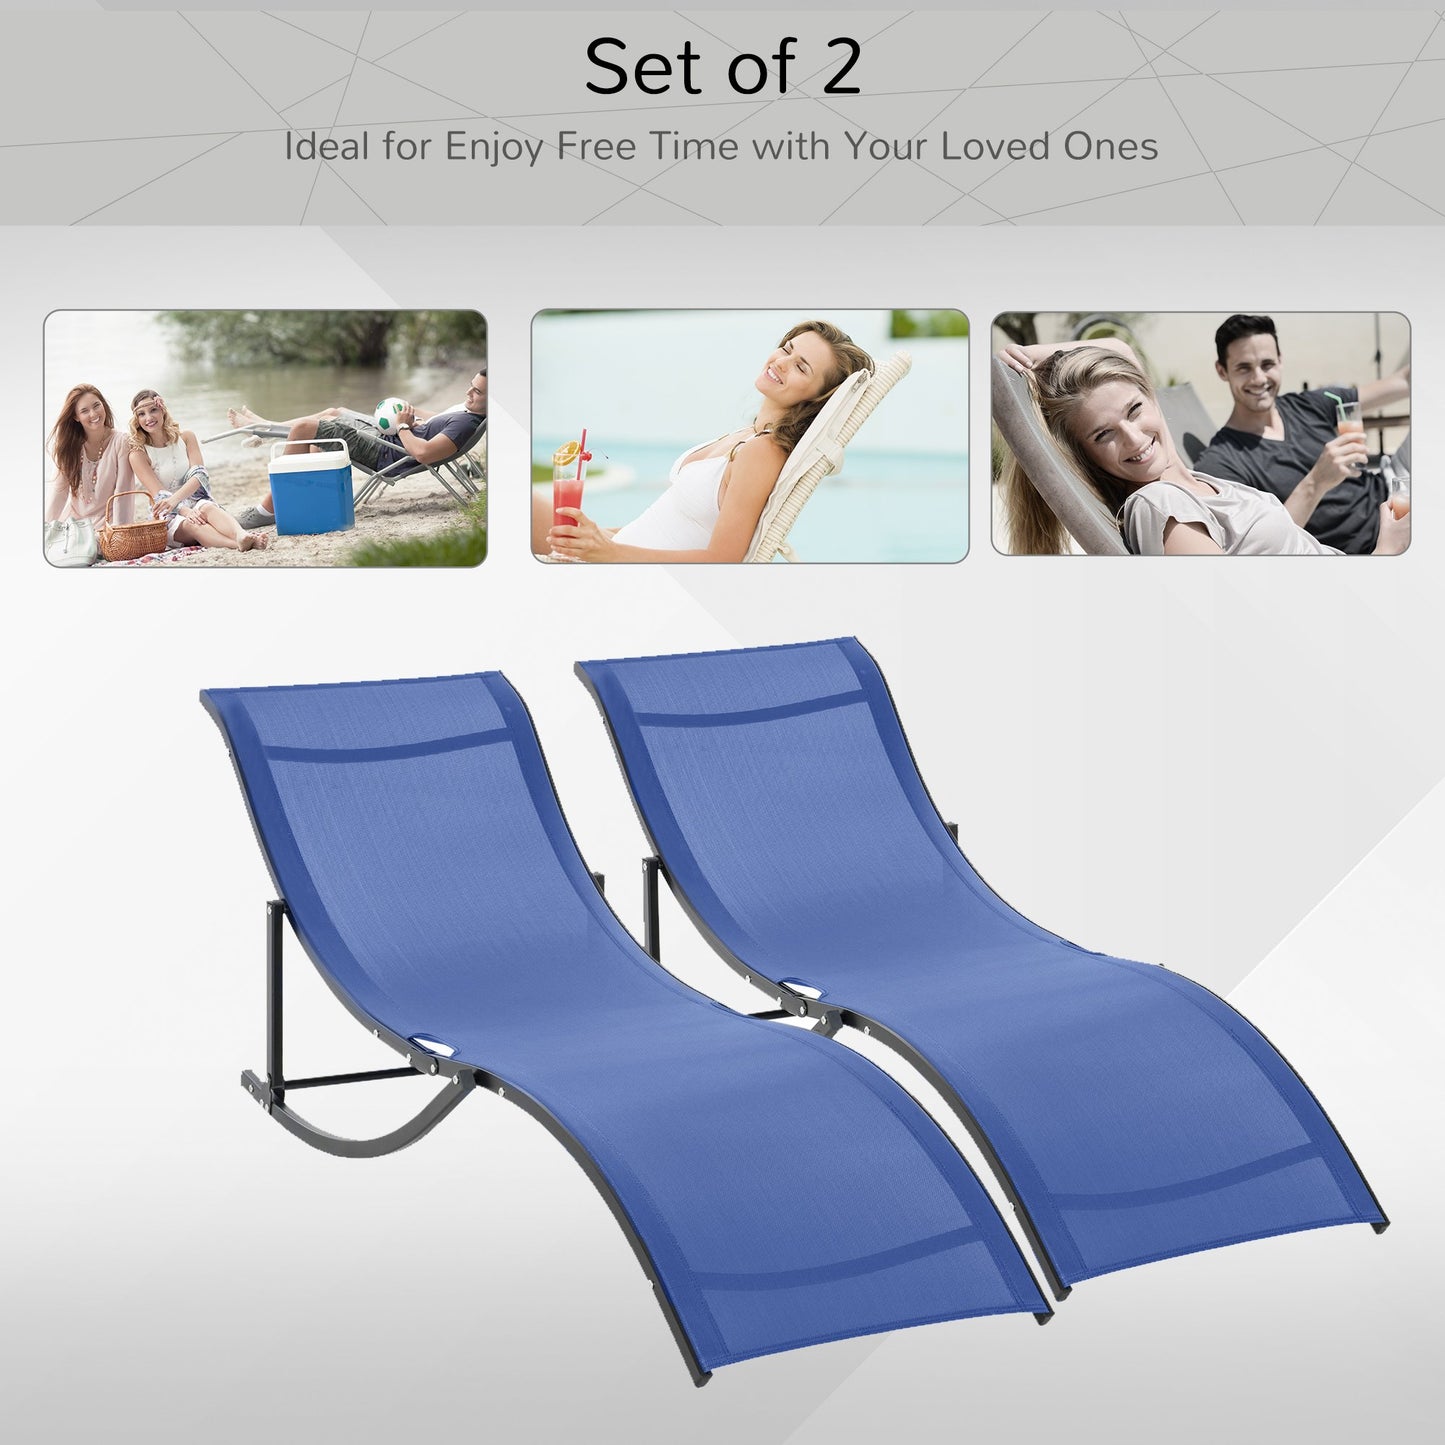 Outsunny Set of 2 S-shaped Lounge Chair Foldable Sleeping Bed 165x61x63cm Navy Blue